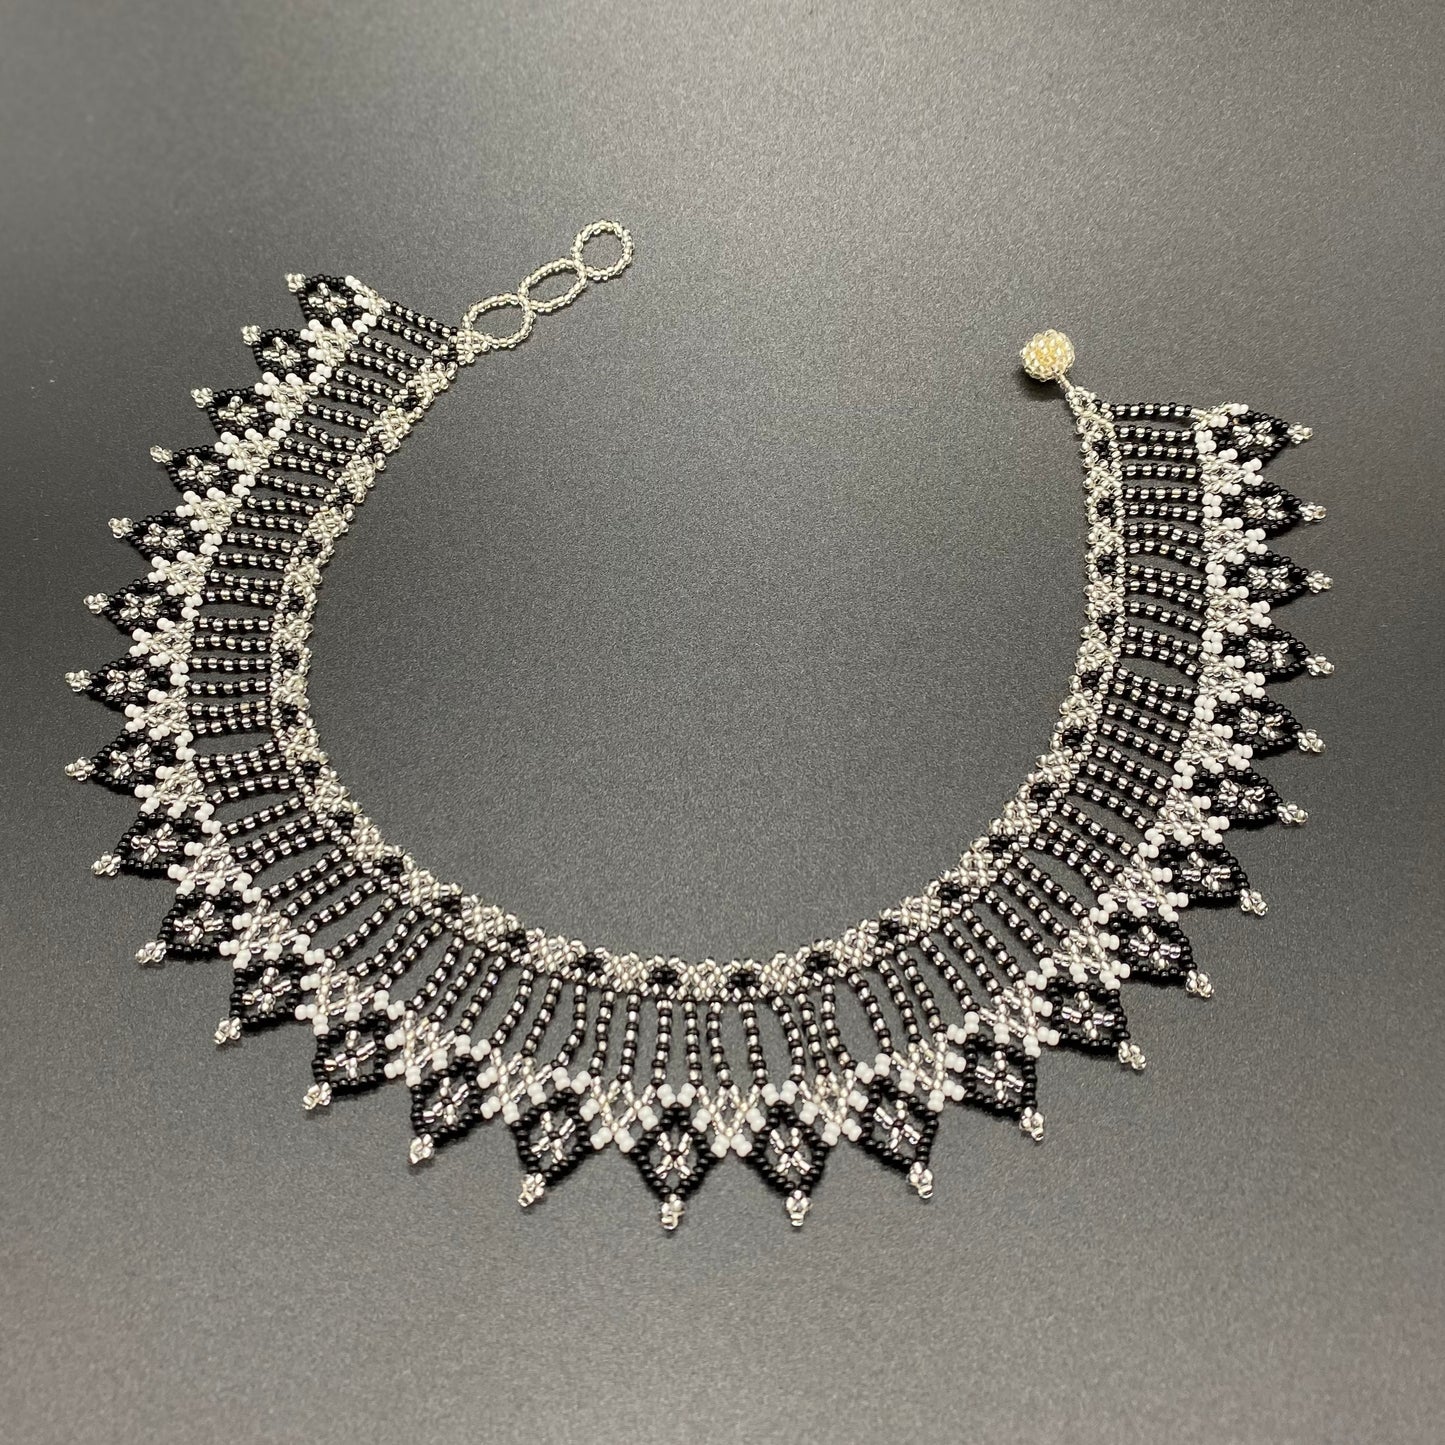 Enlace Beads Collar Necklace / Ice